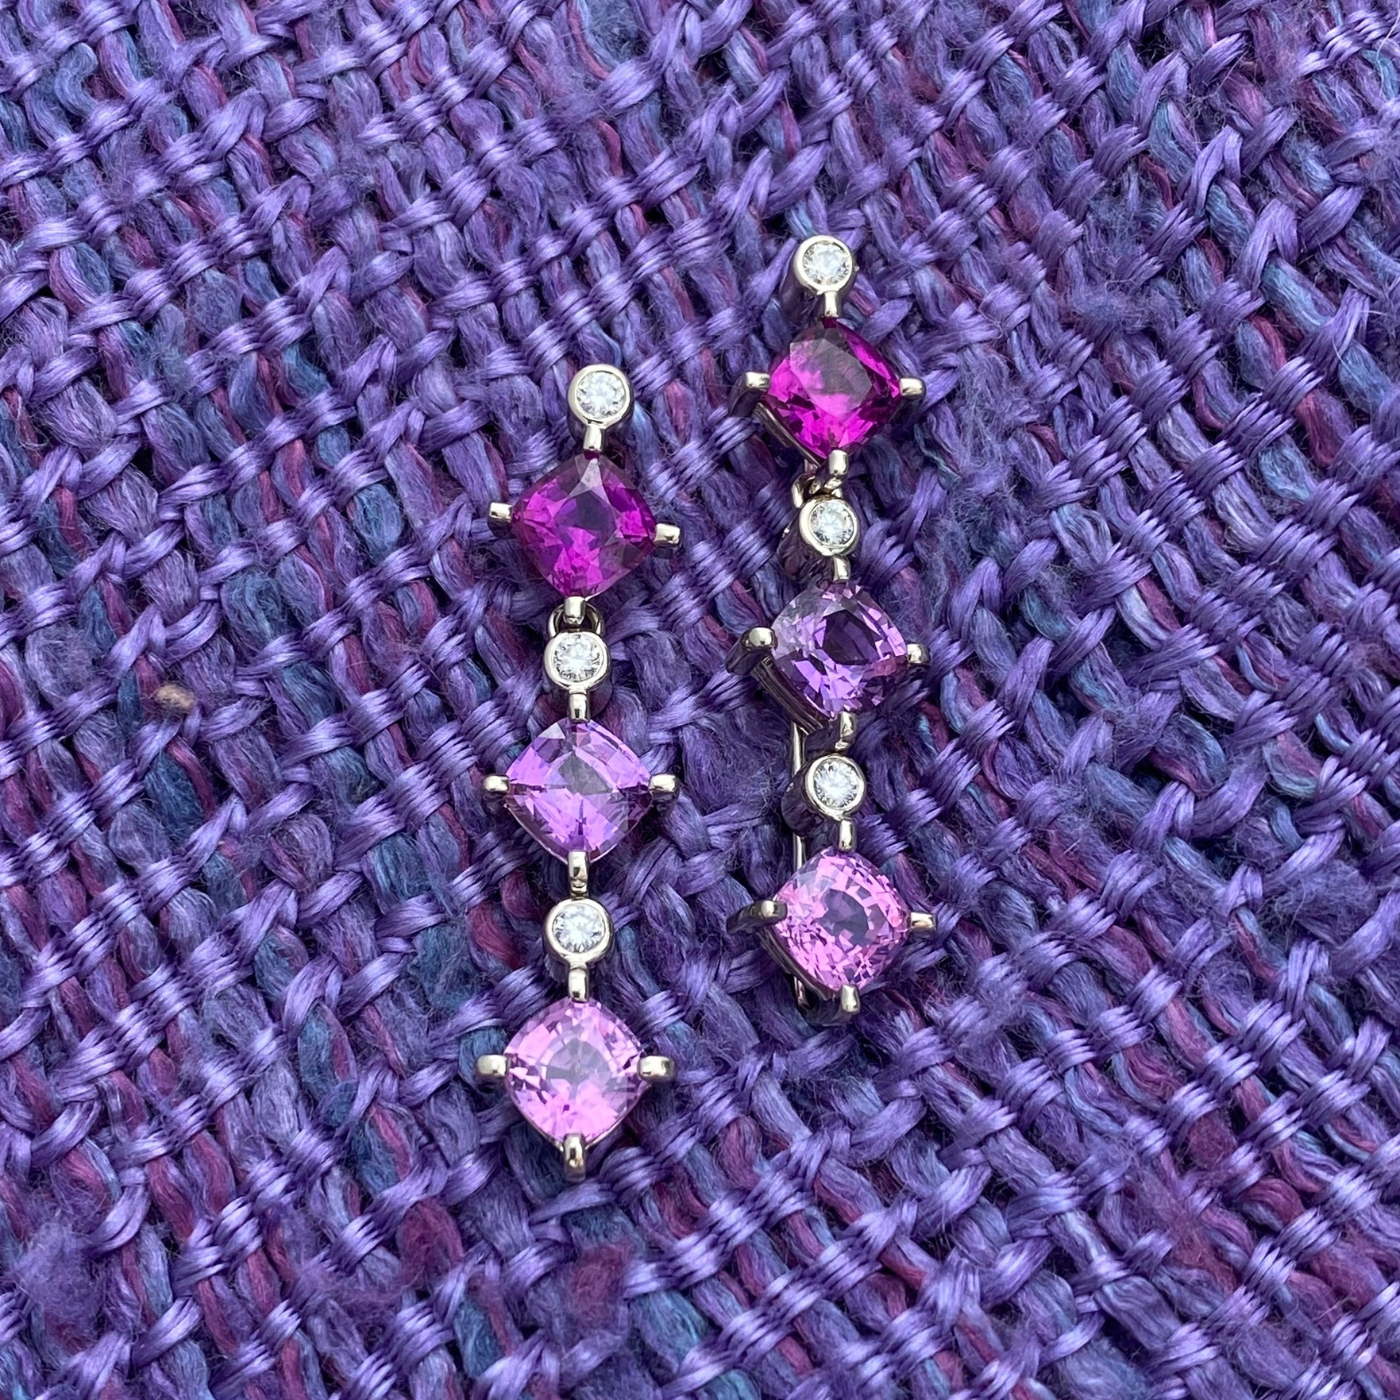 purple Mozambique garnet, purple sapphire and pink sapphire with .023 carats diamonds laid on a swatch of think-weaved purple fabric